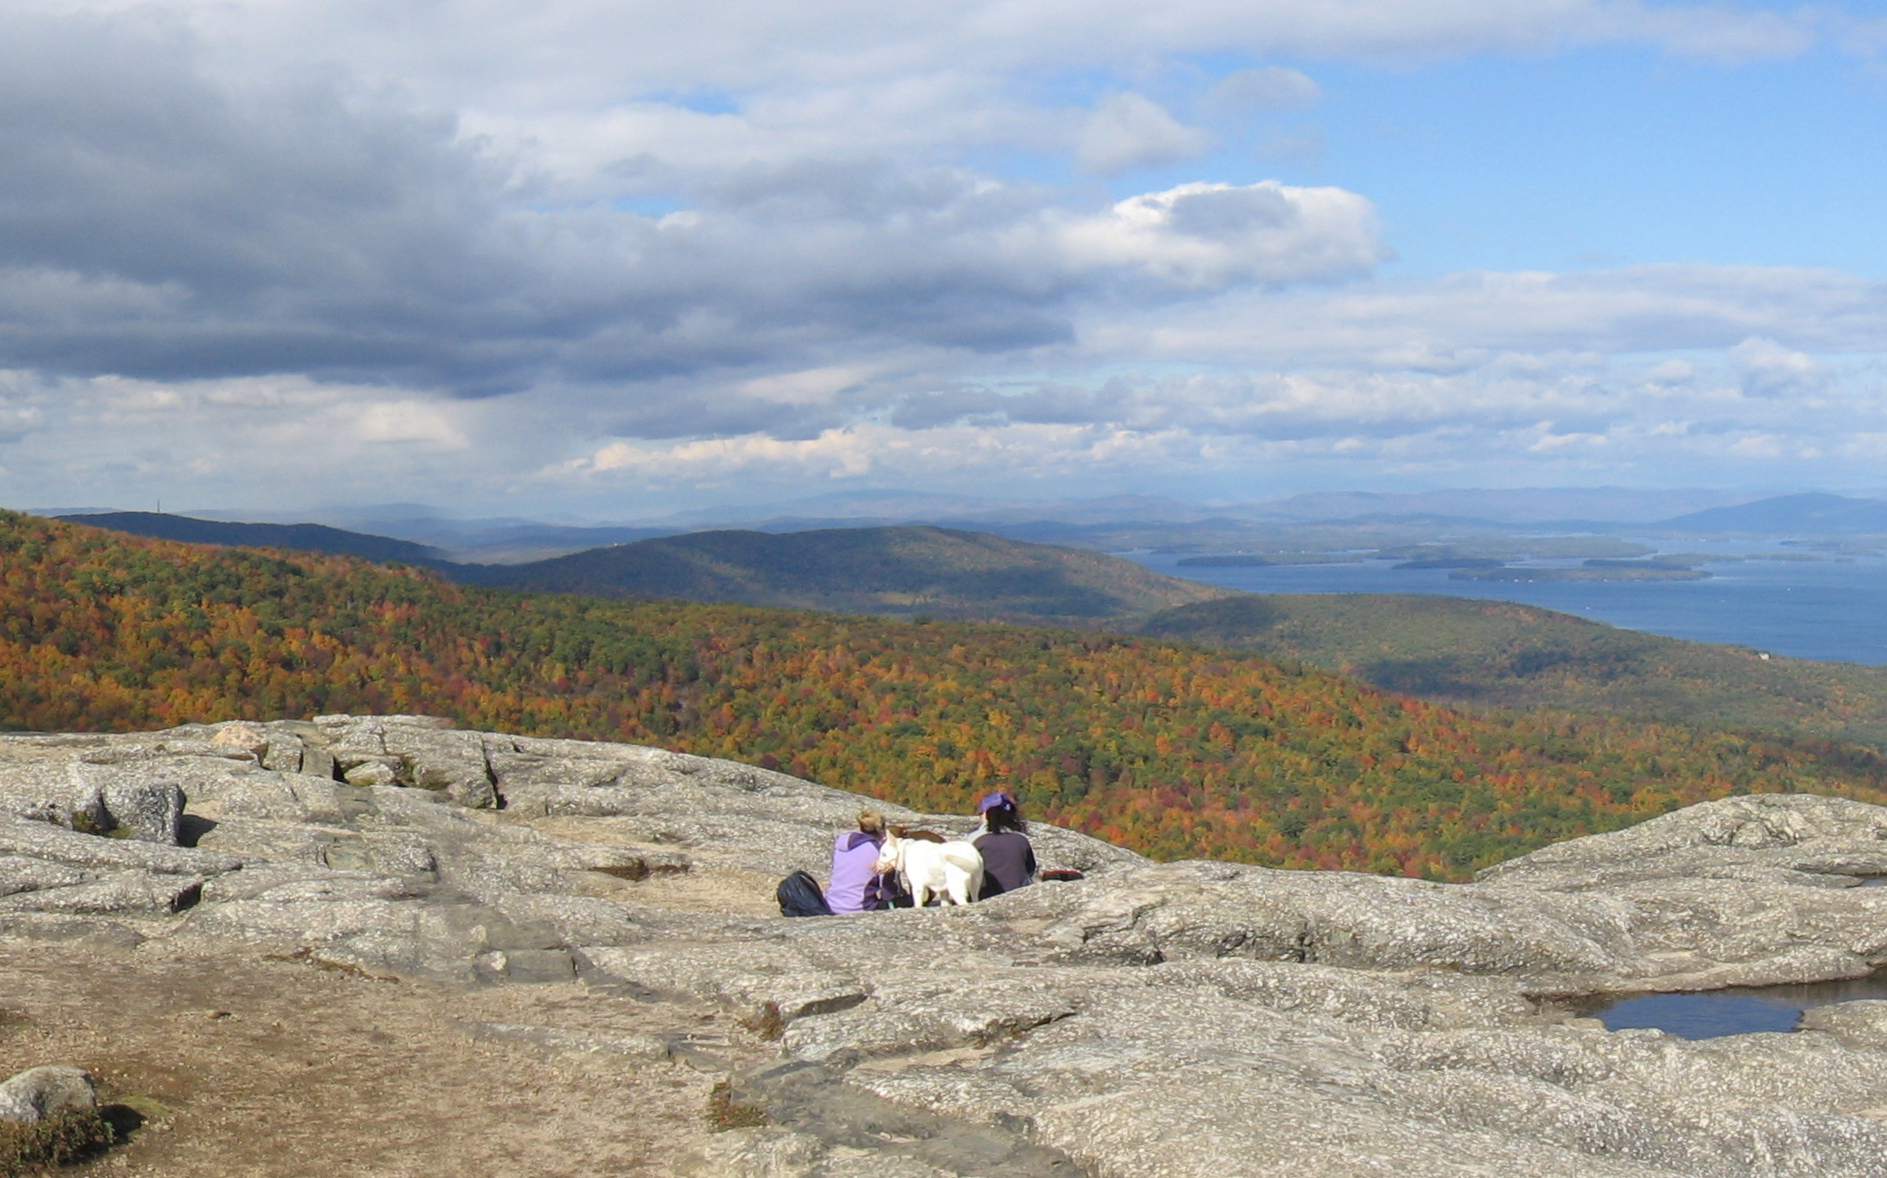 A view from the summit of Mount Major overlooking Lake Winnipesaukee.